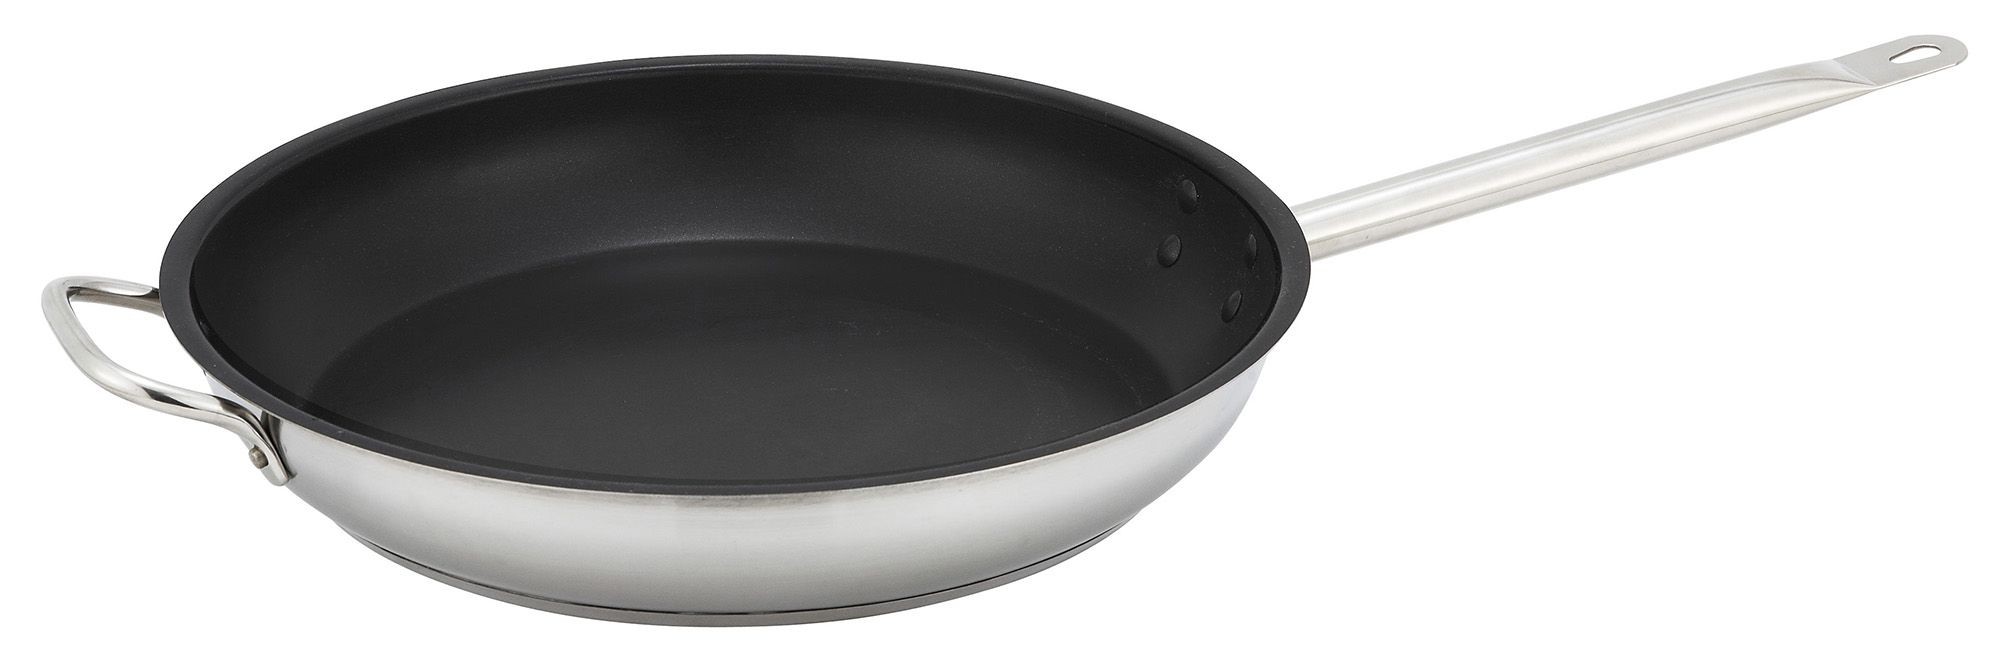 Winco SSFP-14NS Non-Stick Stainless Steel Induction Fry Pan 14"